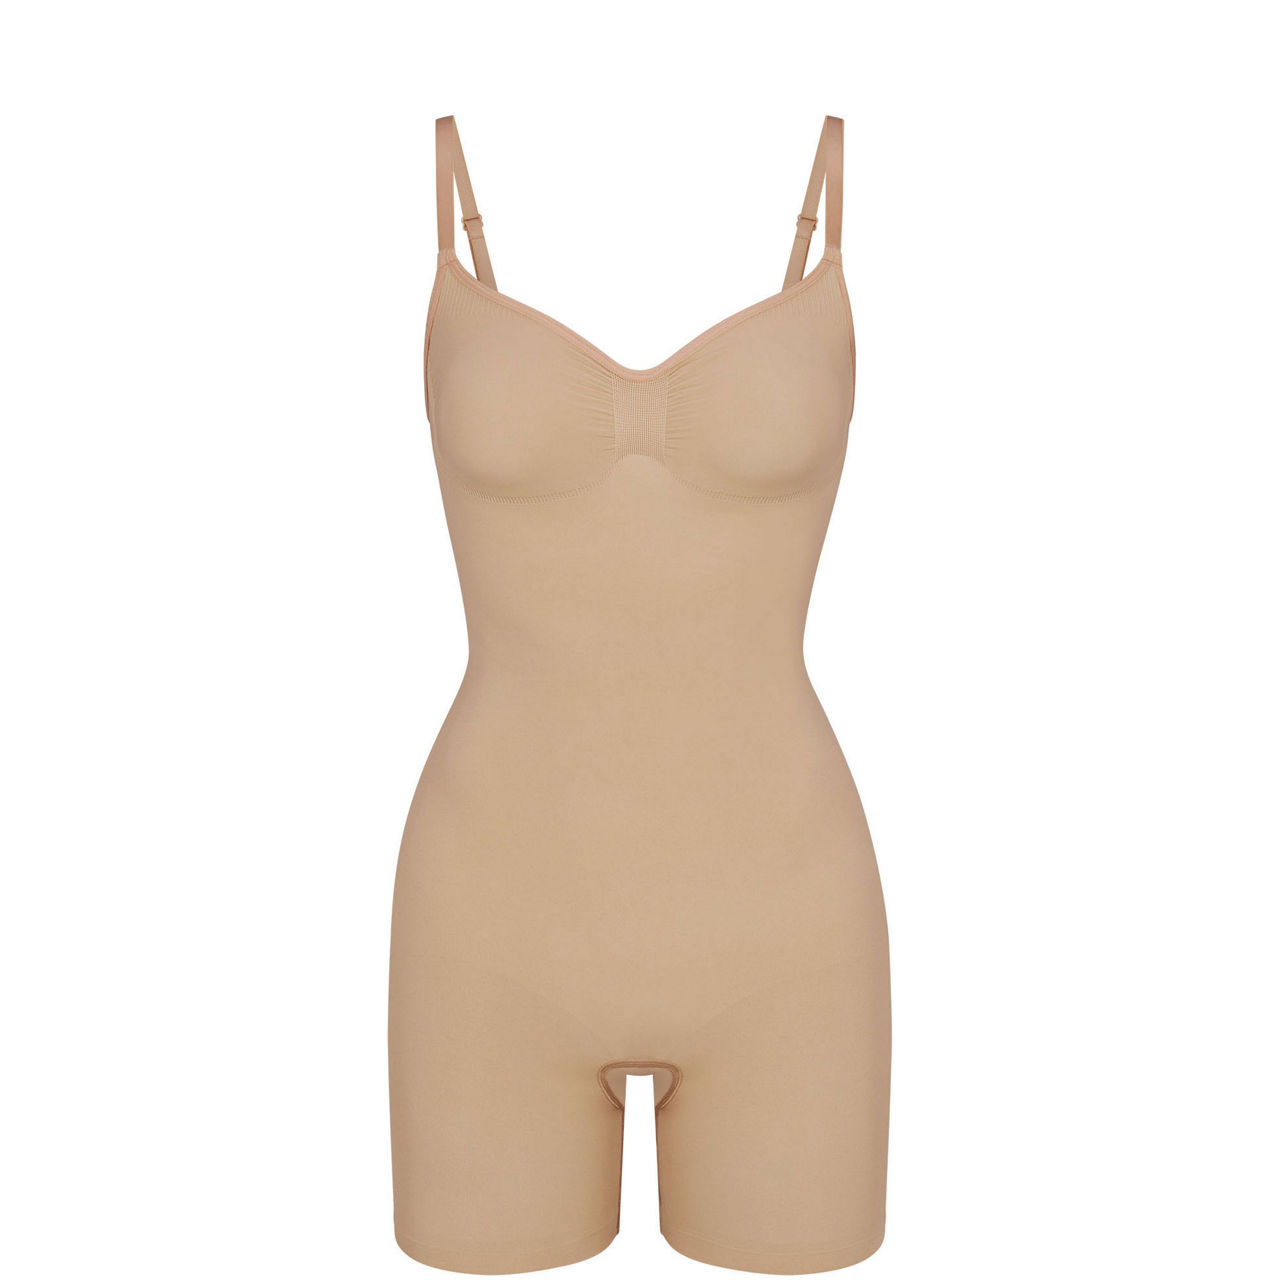 Track Faux Leather High Neck Bodysuit - Cocoa - XL at Skims